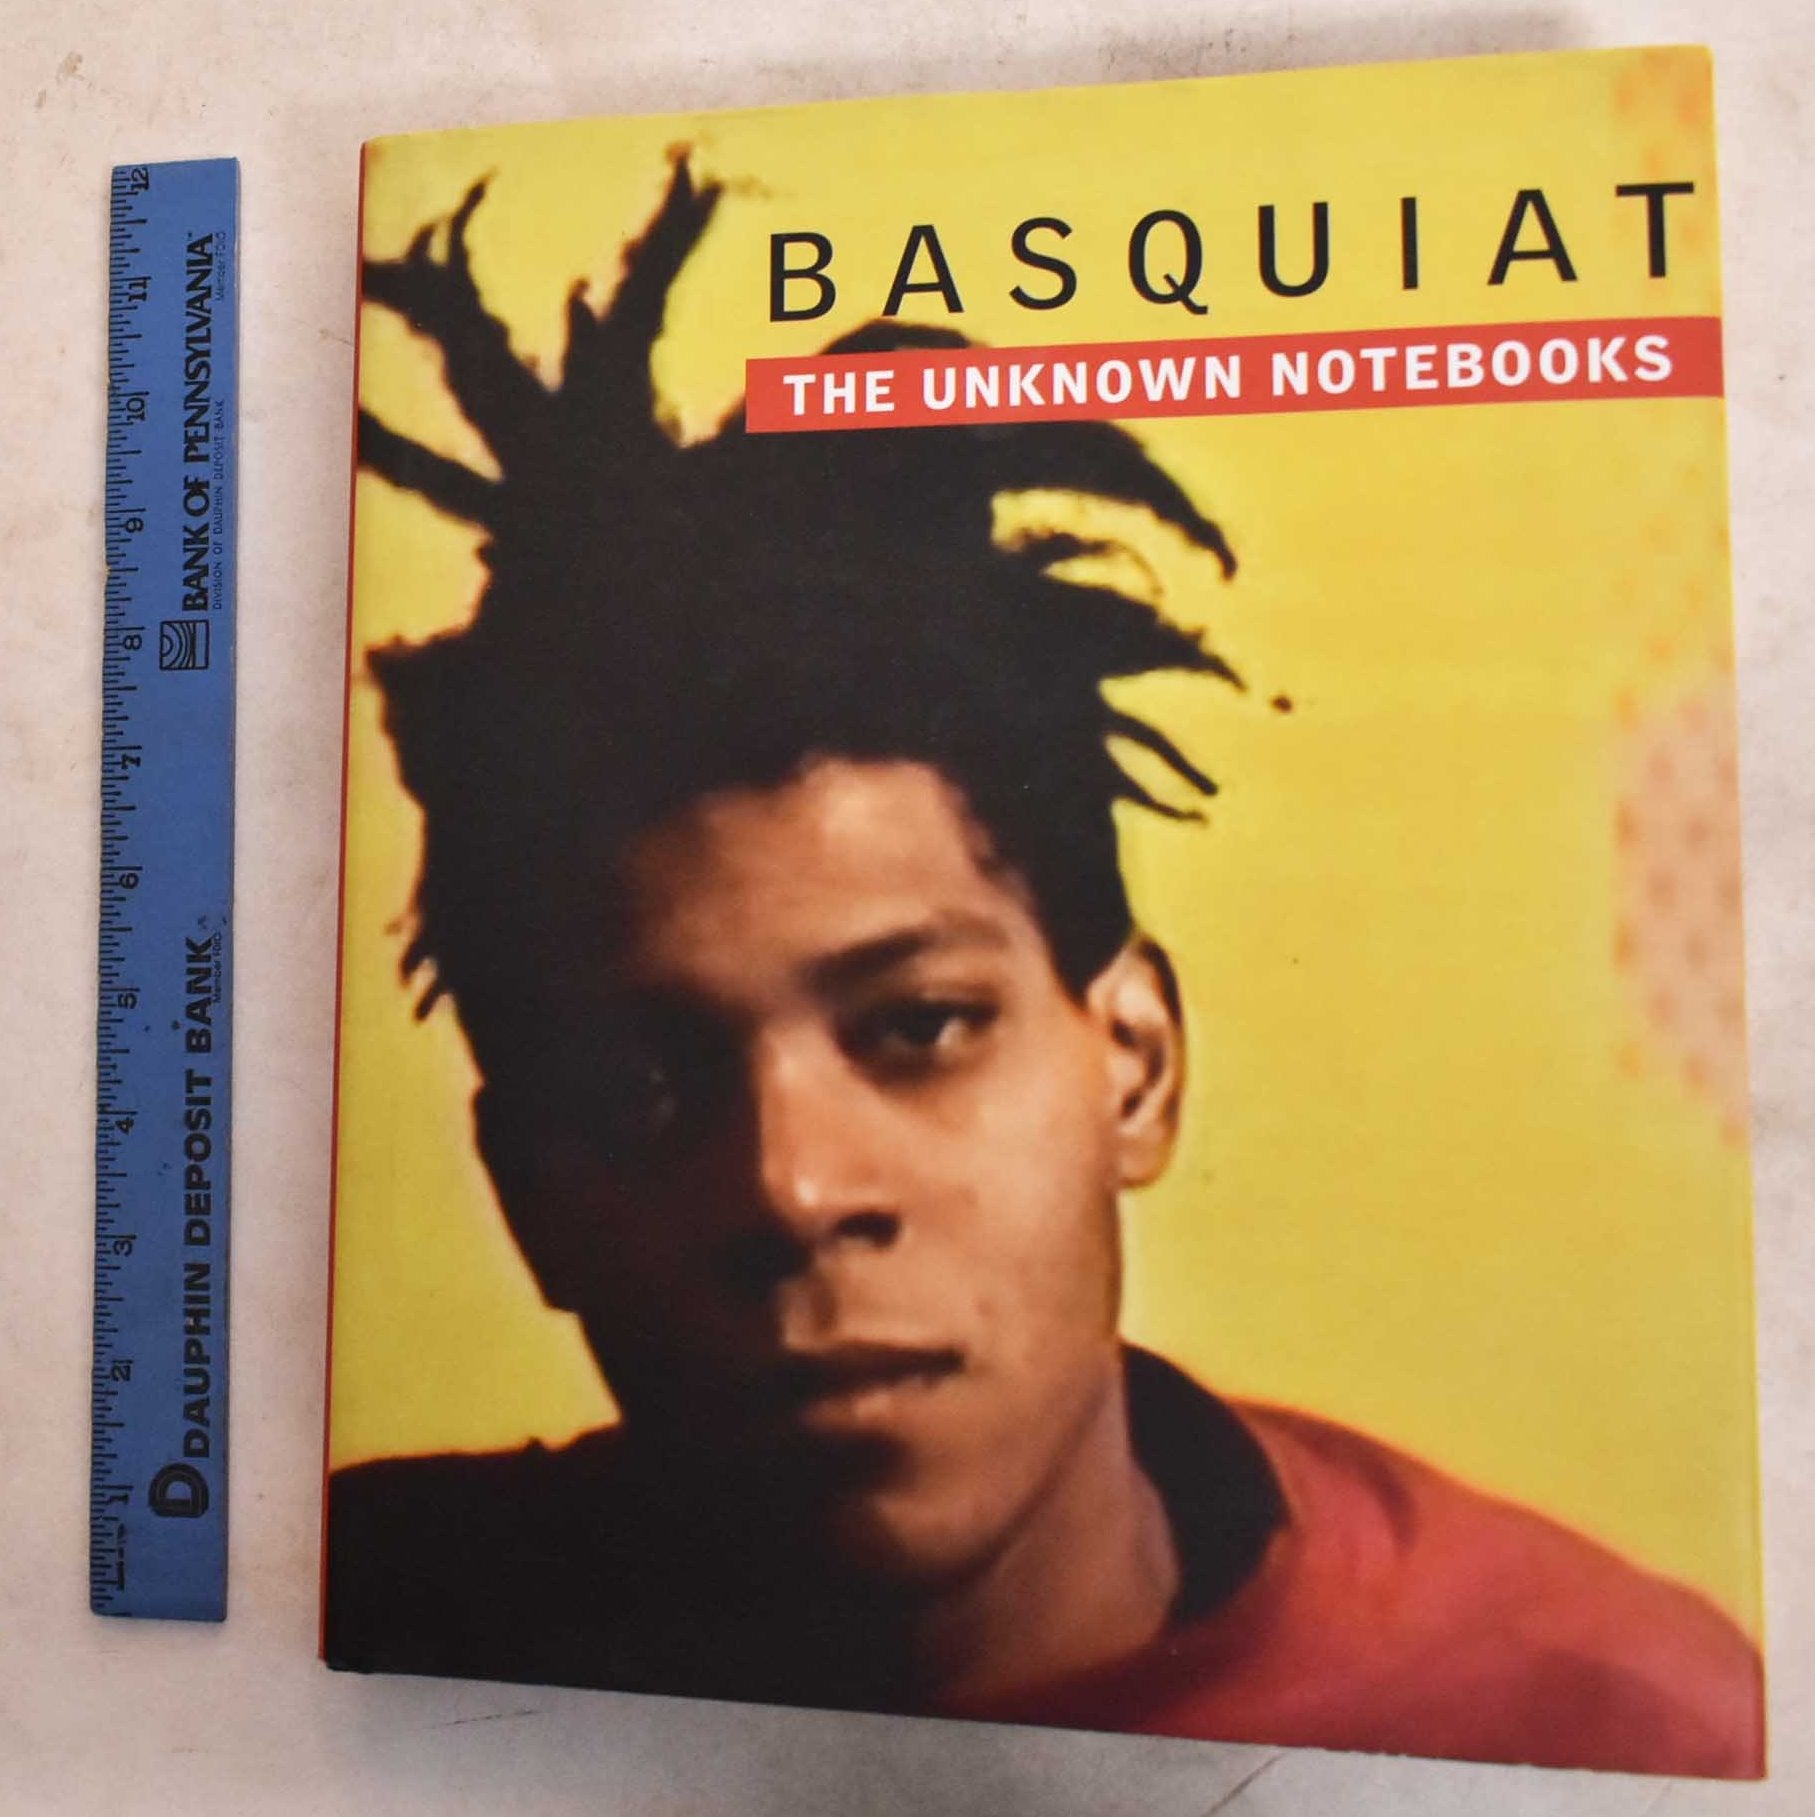 Basquiat: The Unknown Notebooks by Dieter Buchhart, Tricia Laughlin Bloom  on Mullen Books